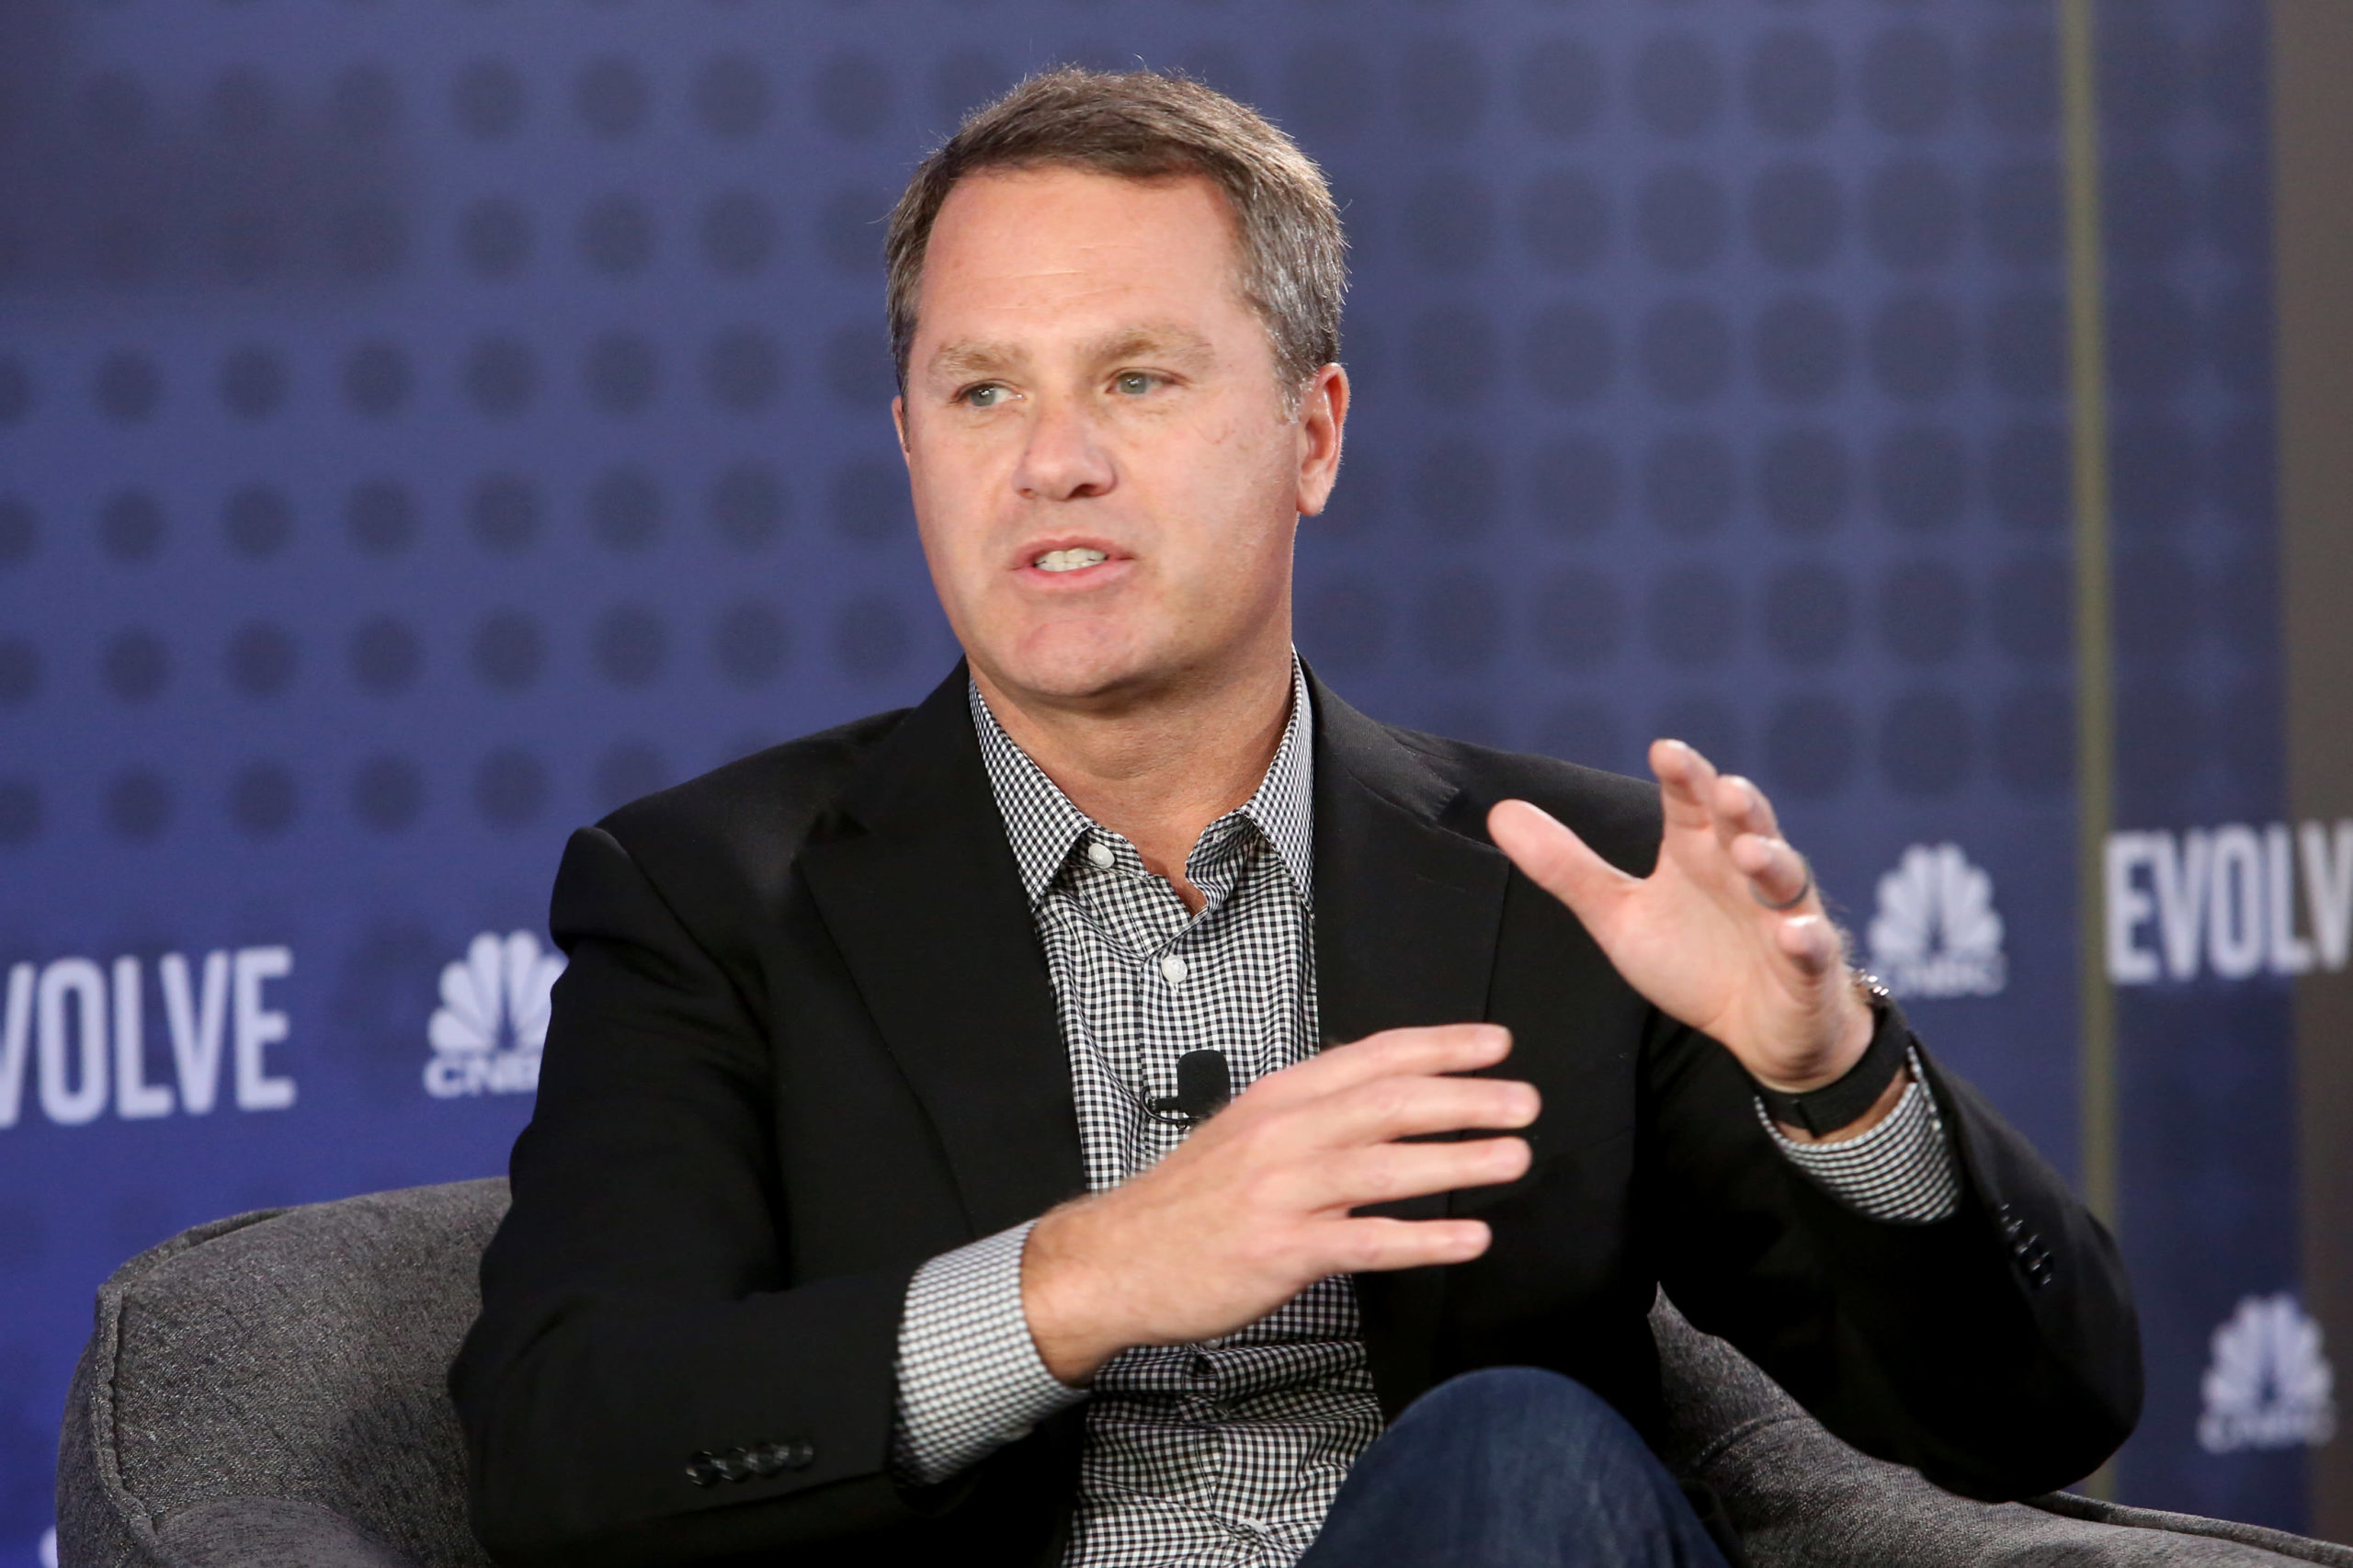 Walmart CEO Doug McMillon mentioned CEOs should advance racial equality